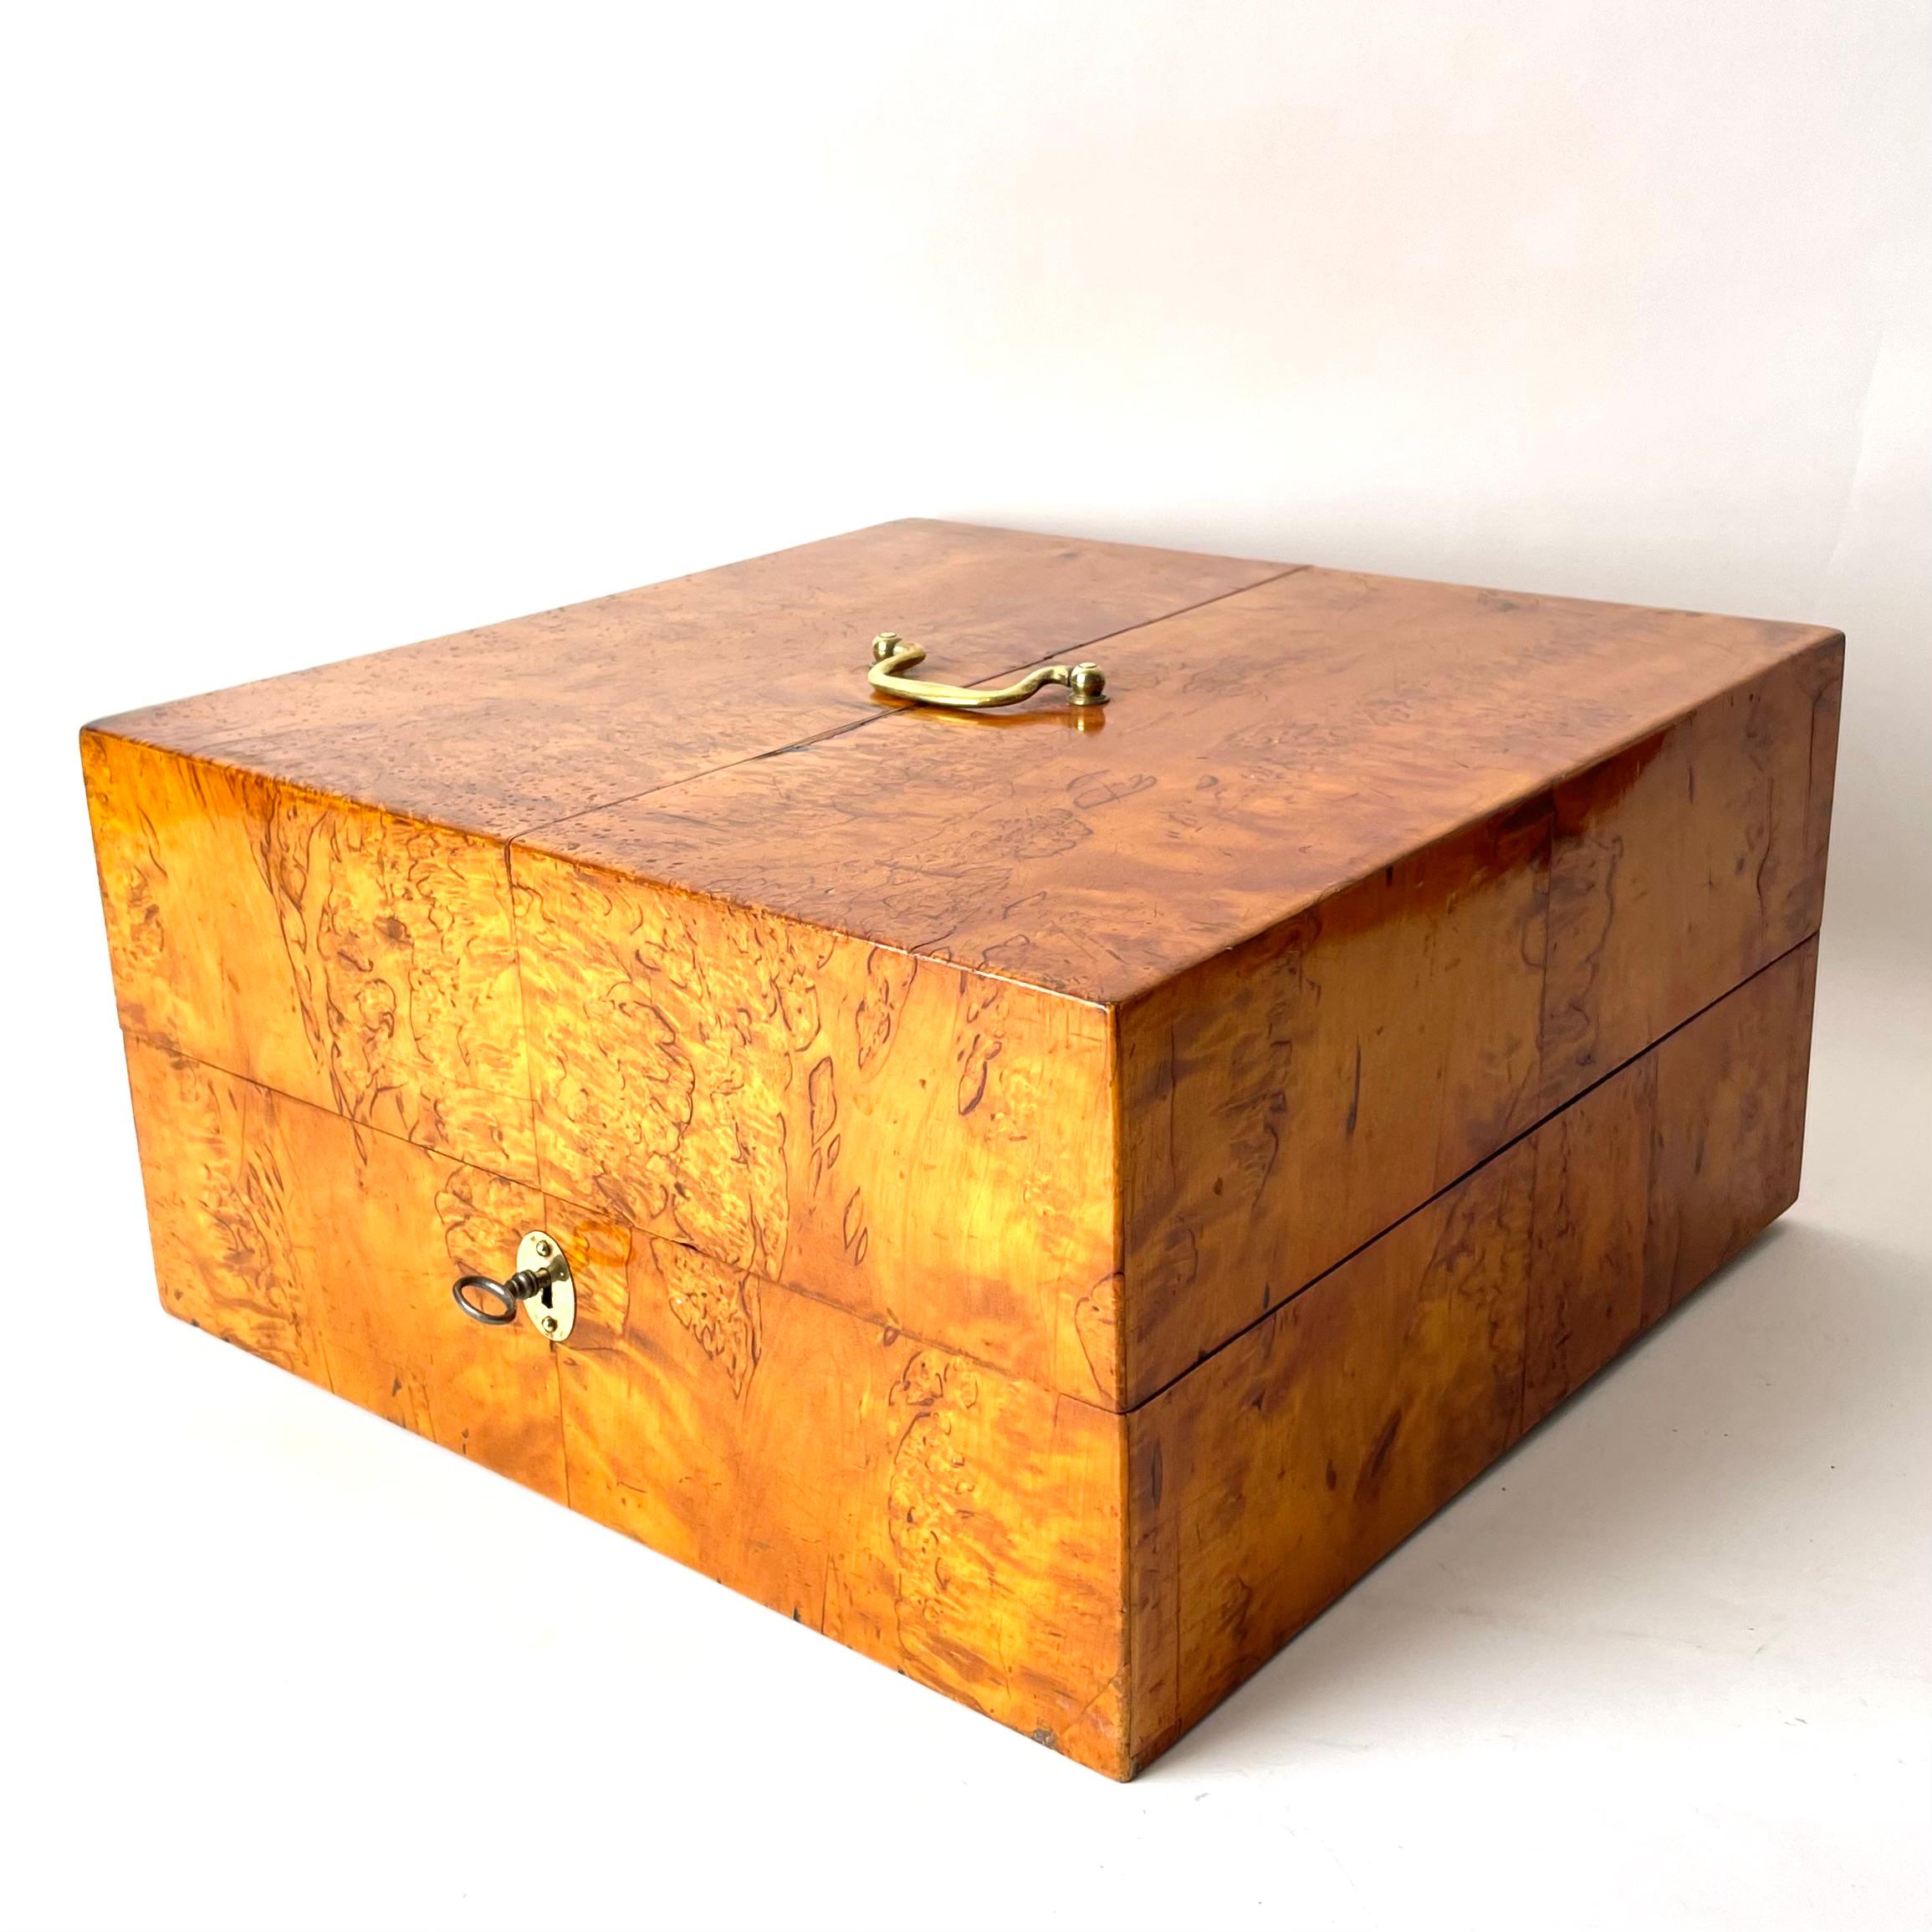 Swedish Backgammom Box in Curly Karelian Birch with Playing Pieces, Swedish Empire  (Karl Johan) 1820/30s. Complete with two Die made in bone and Playing Pieces for two players.

This beautifully crafted backgammon box is made from curly Karelian